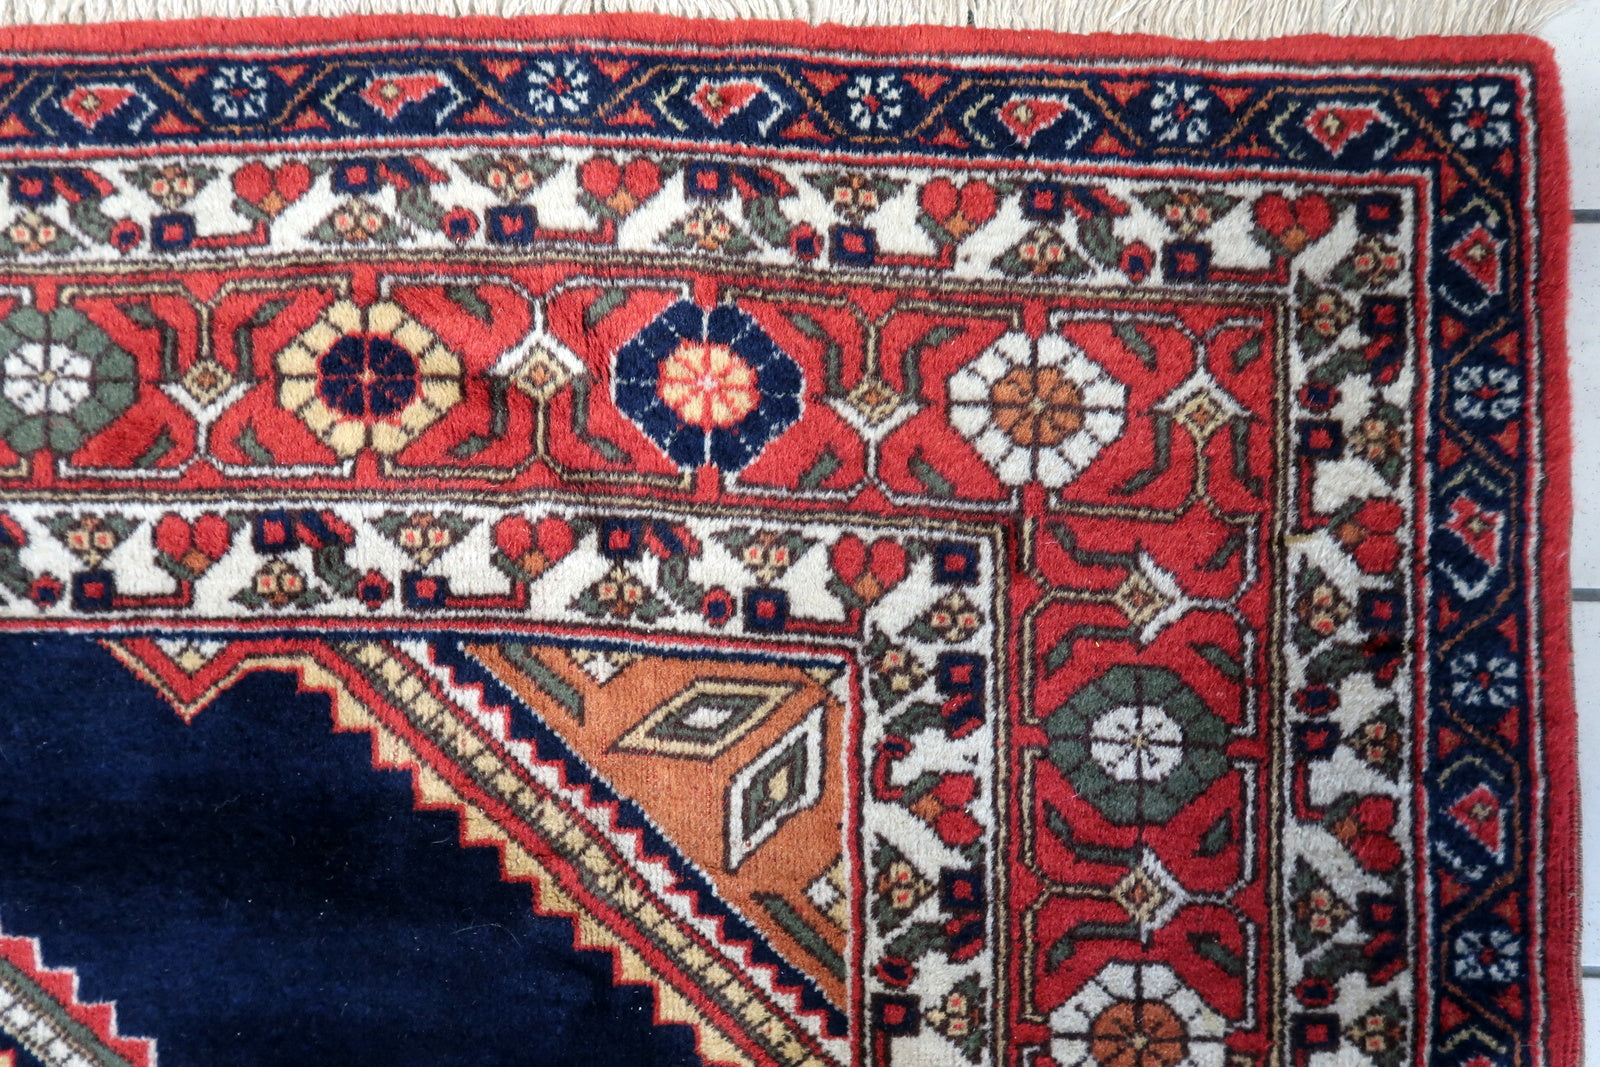 Close-up of the symmetrical geometric designs dominating the central area of the rug